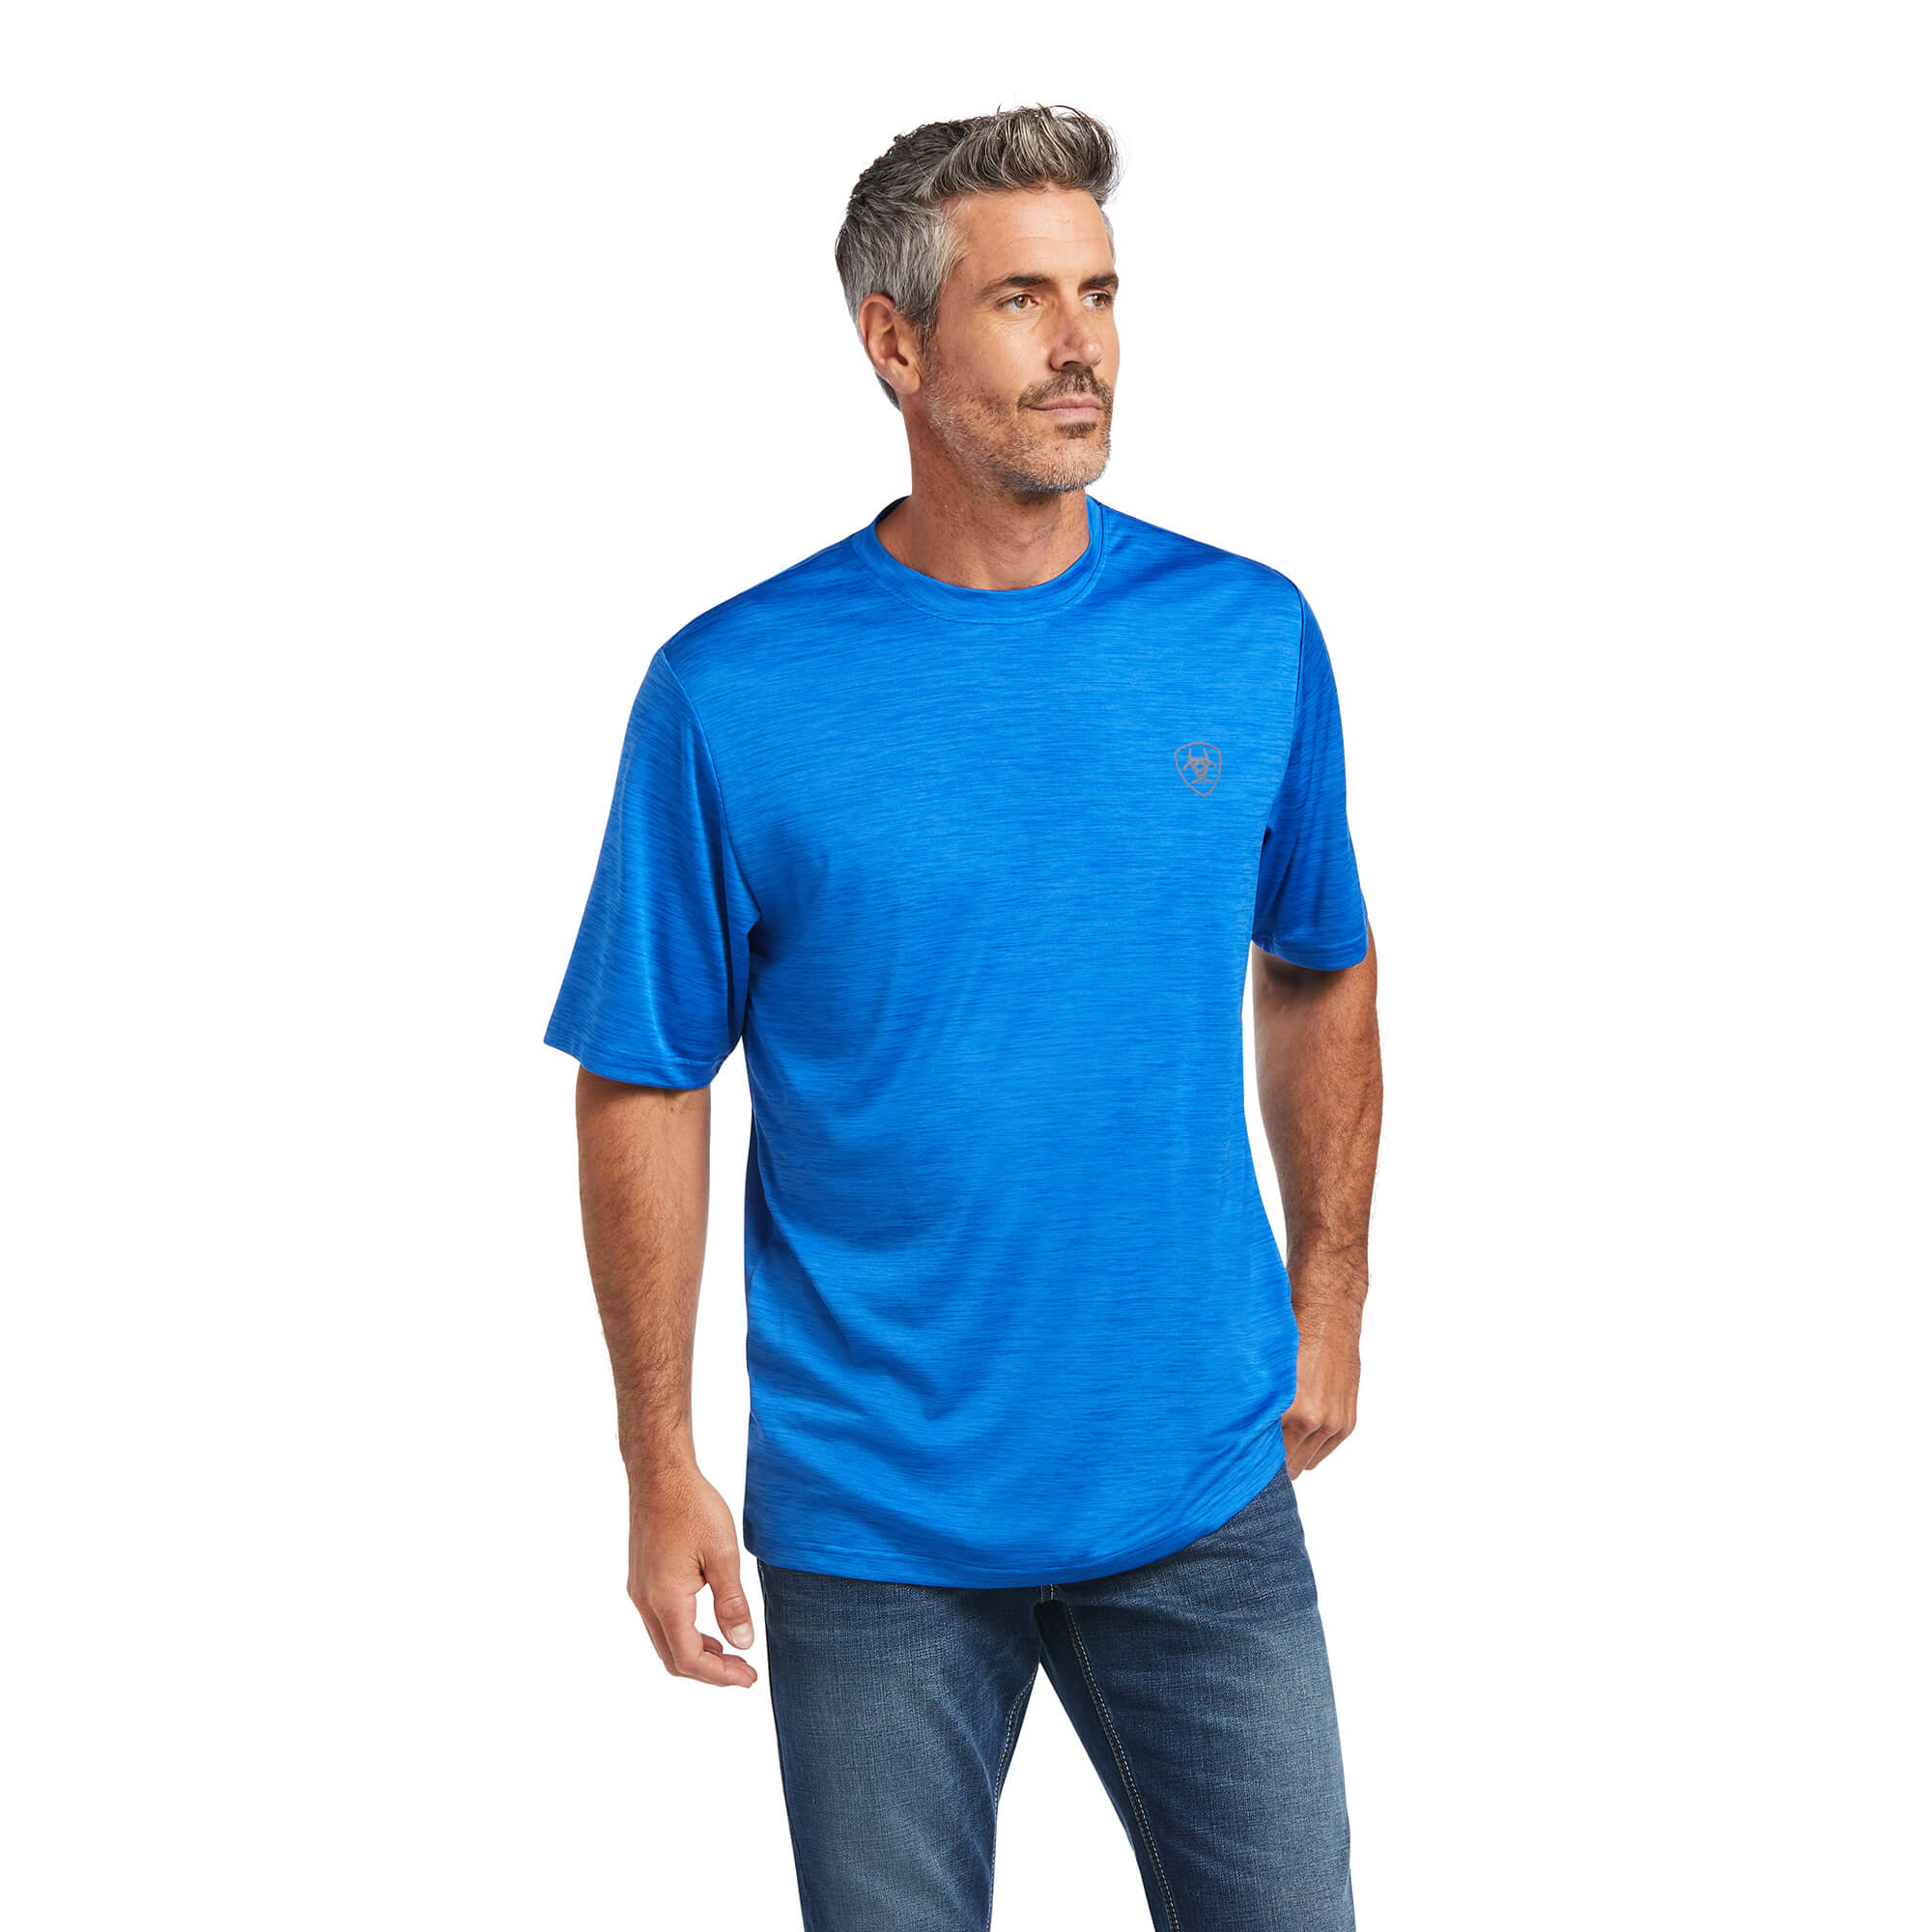 Ariat Men's Charger Shield Tee - Nate's Western Wear